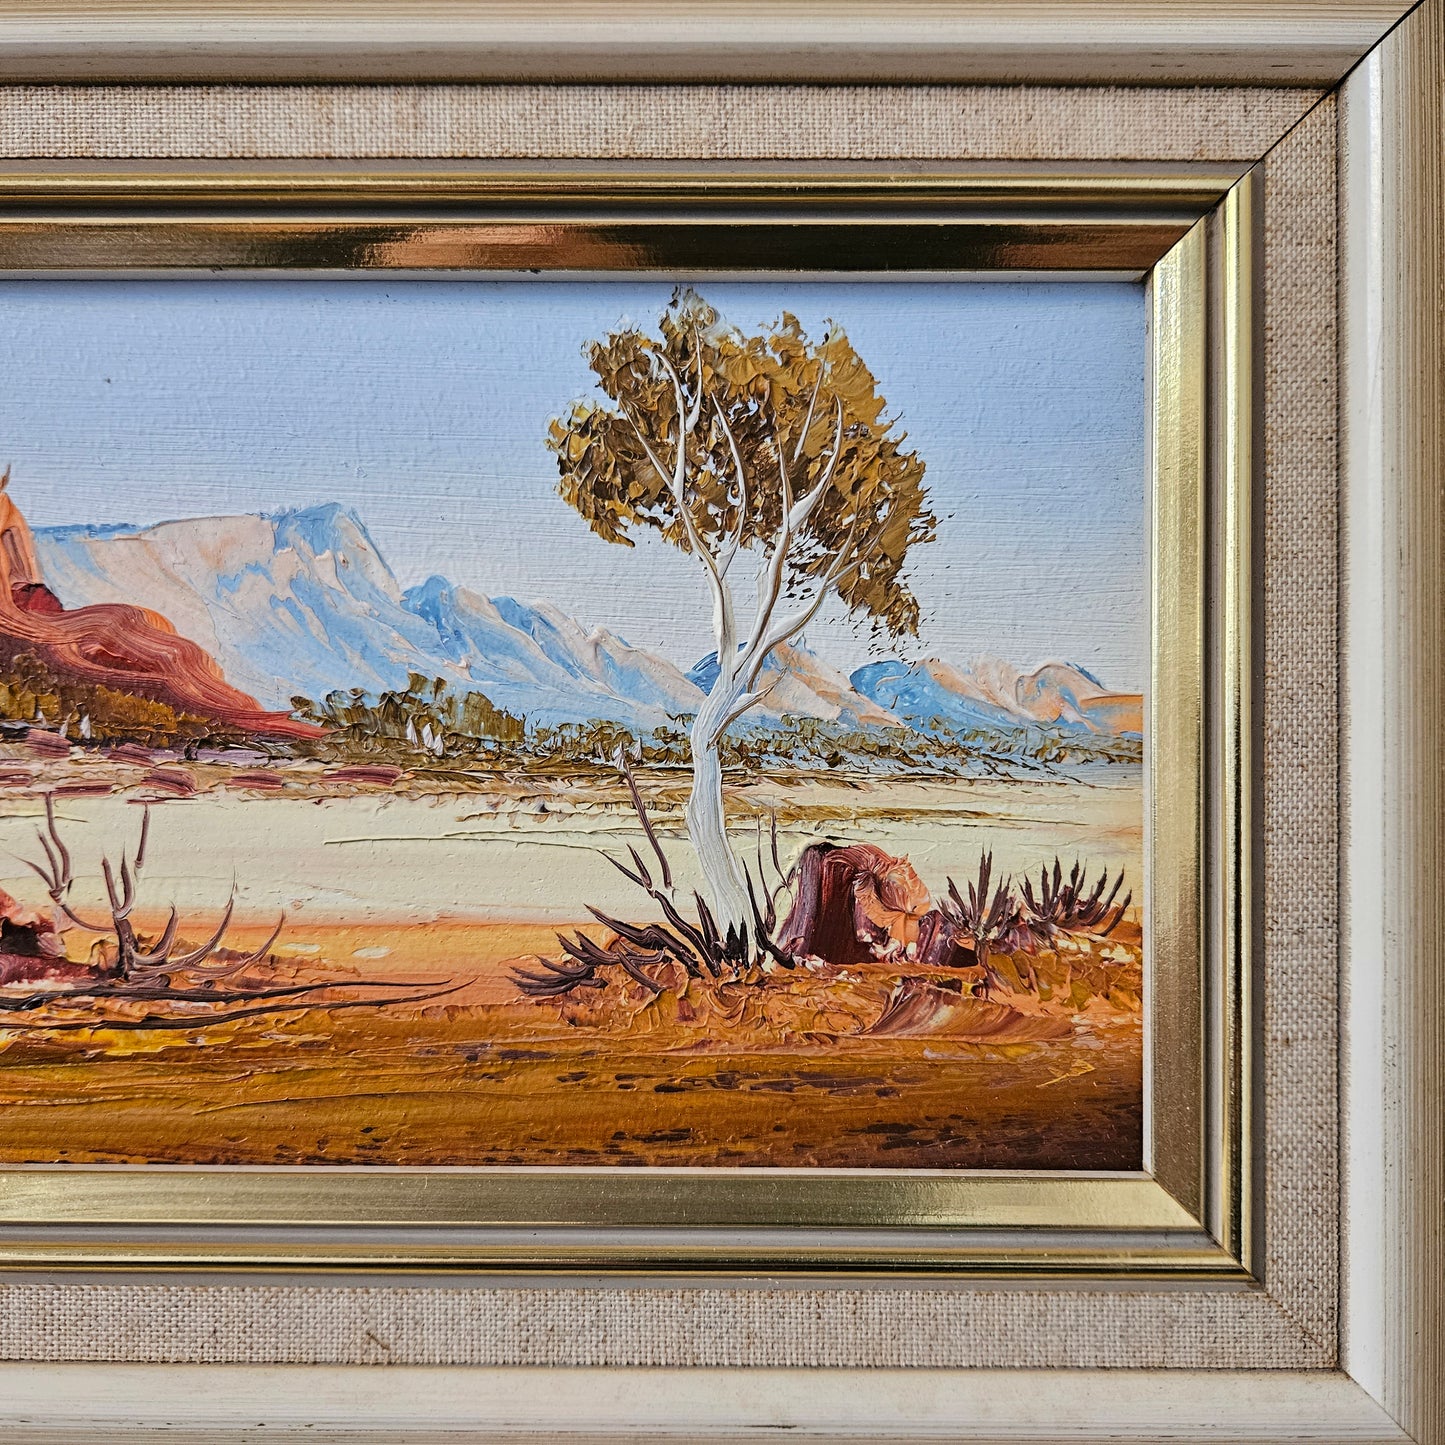 Signed Oil On Board 'Alice Springs NT' Painting